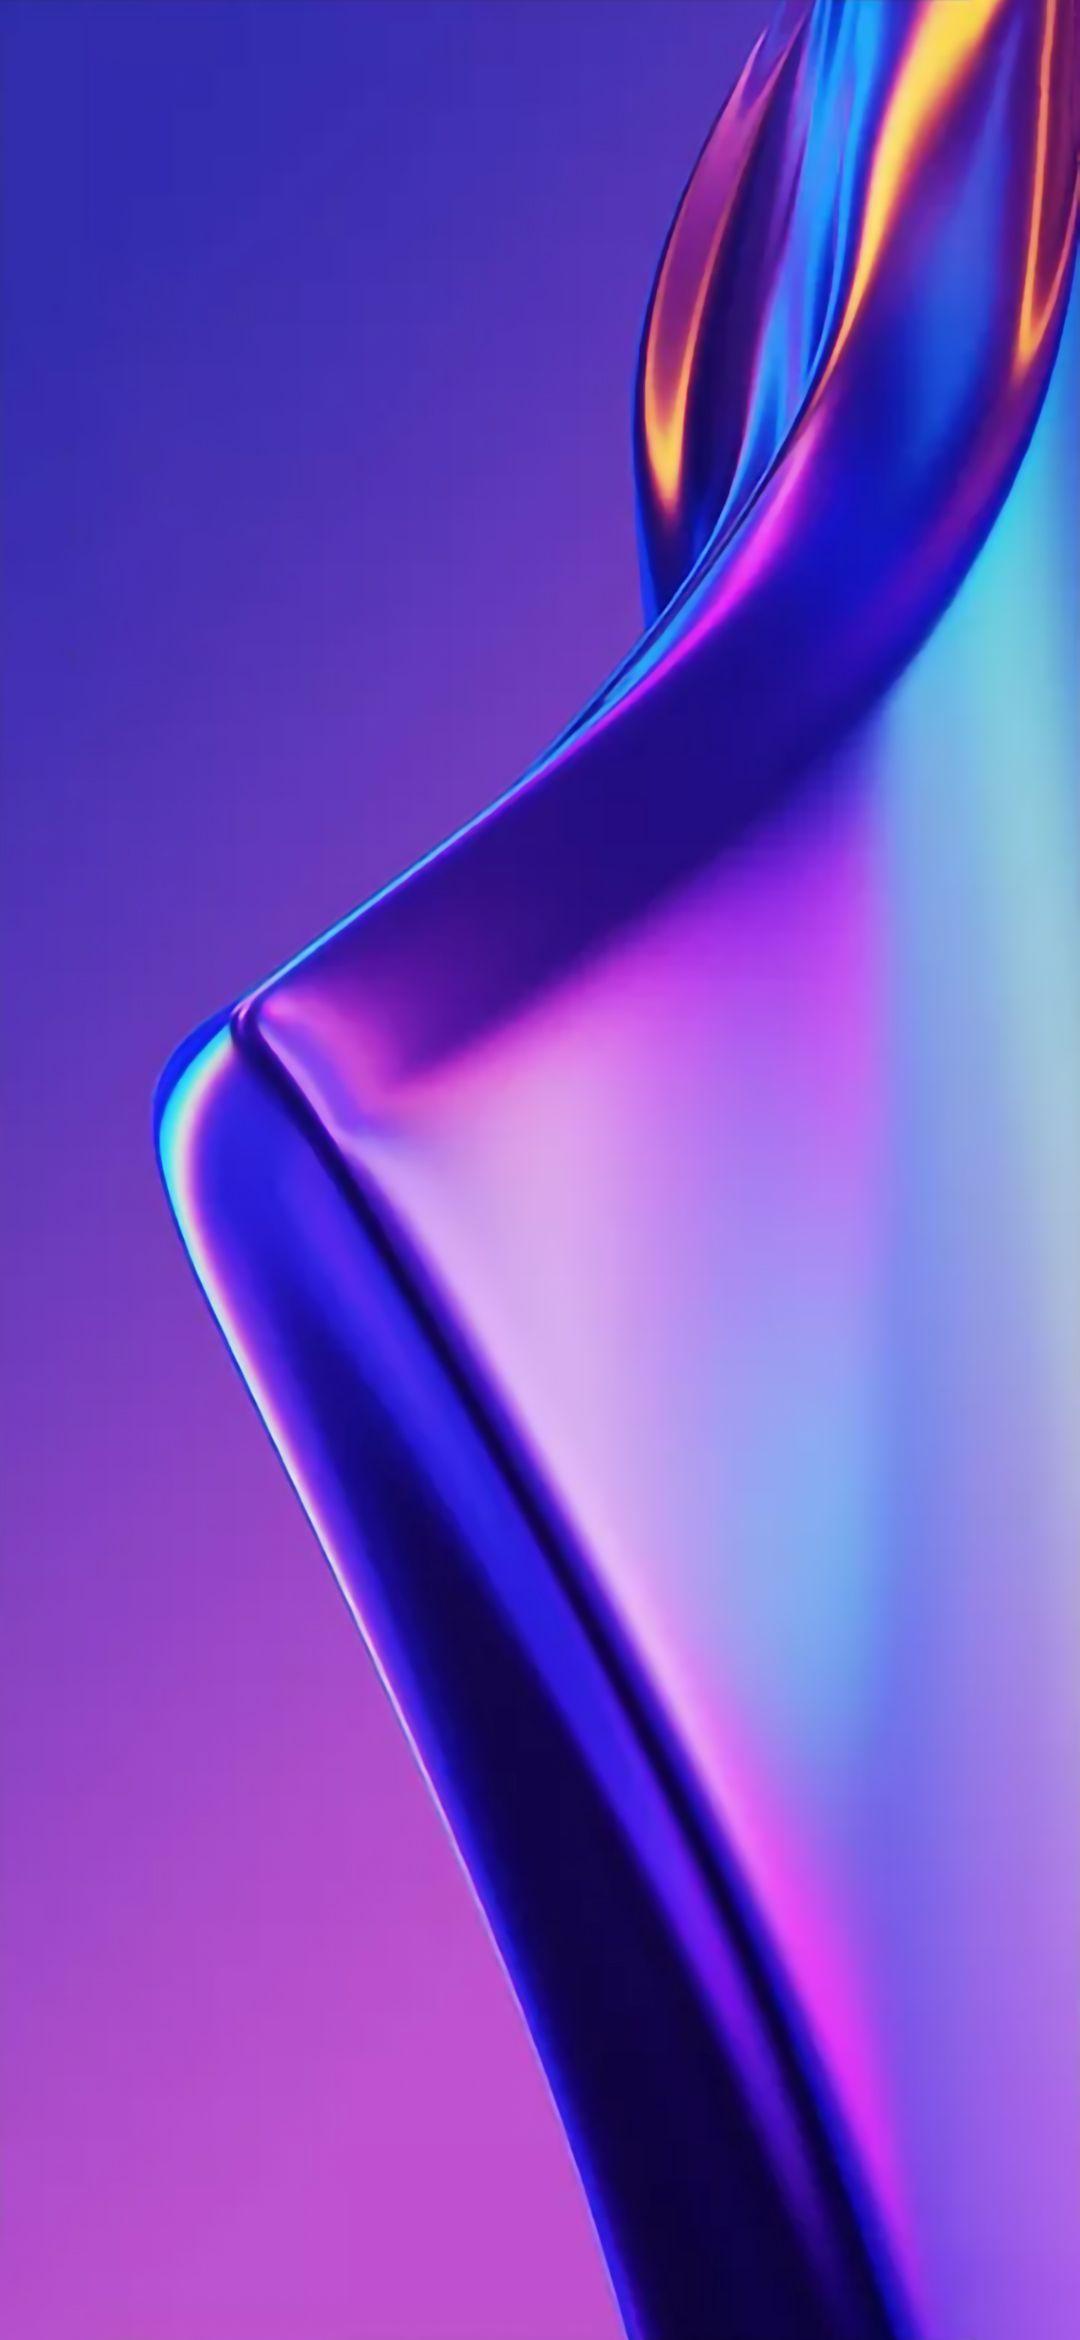 Download Oppo K3 Official Wallpaper Here! Full HD Resolution